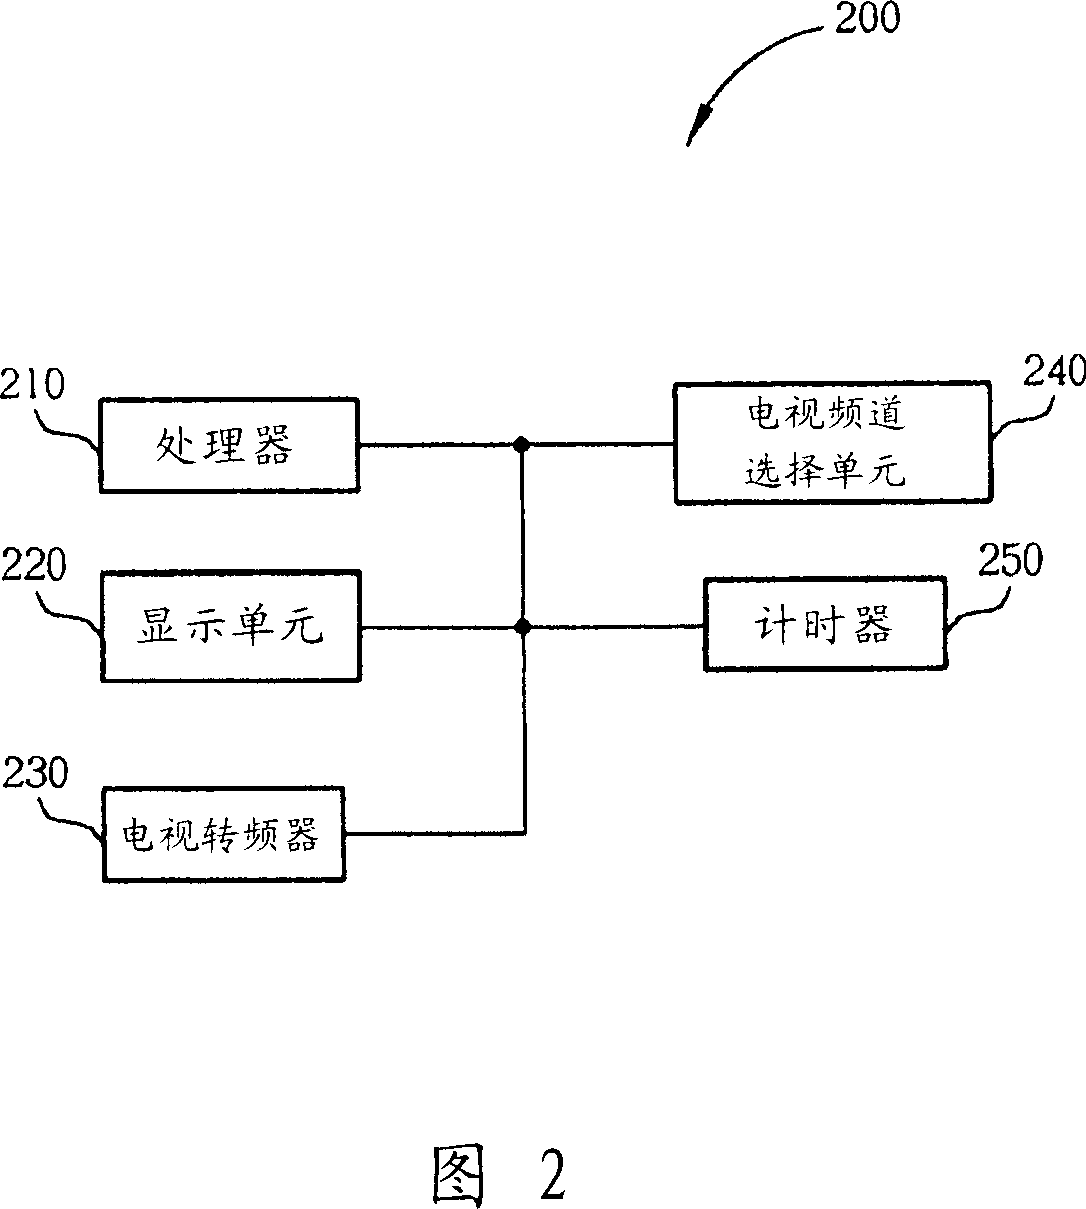 Method of quickly selecting a television channel and related video device